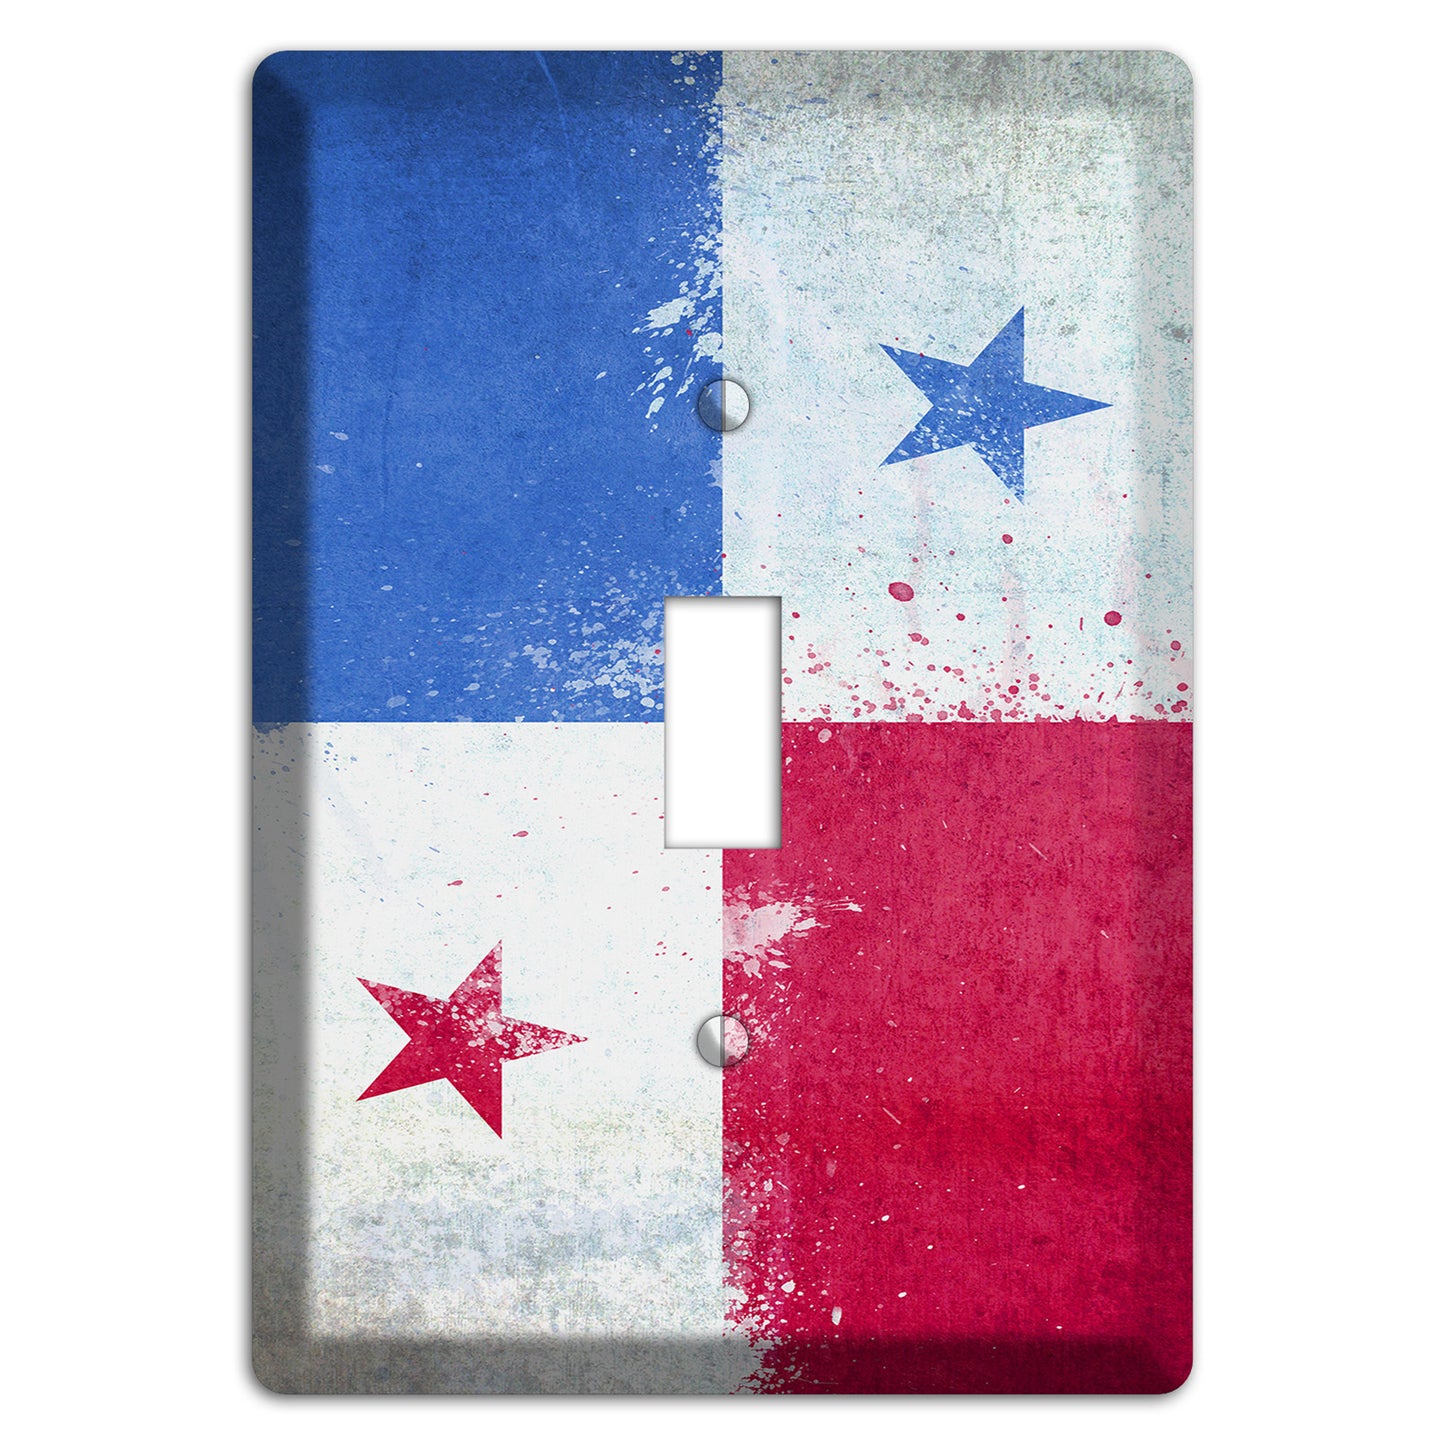 Panama Cover Plates Cover Plates